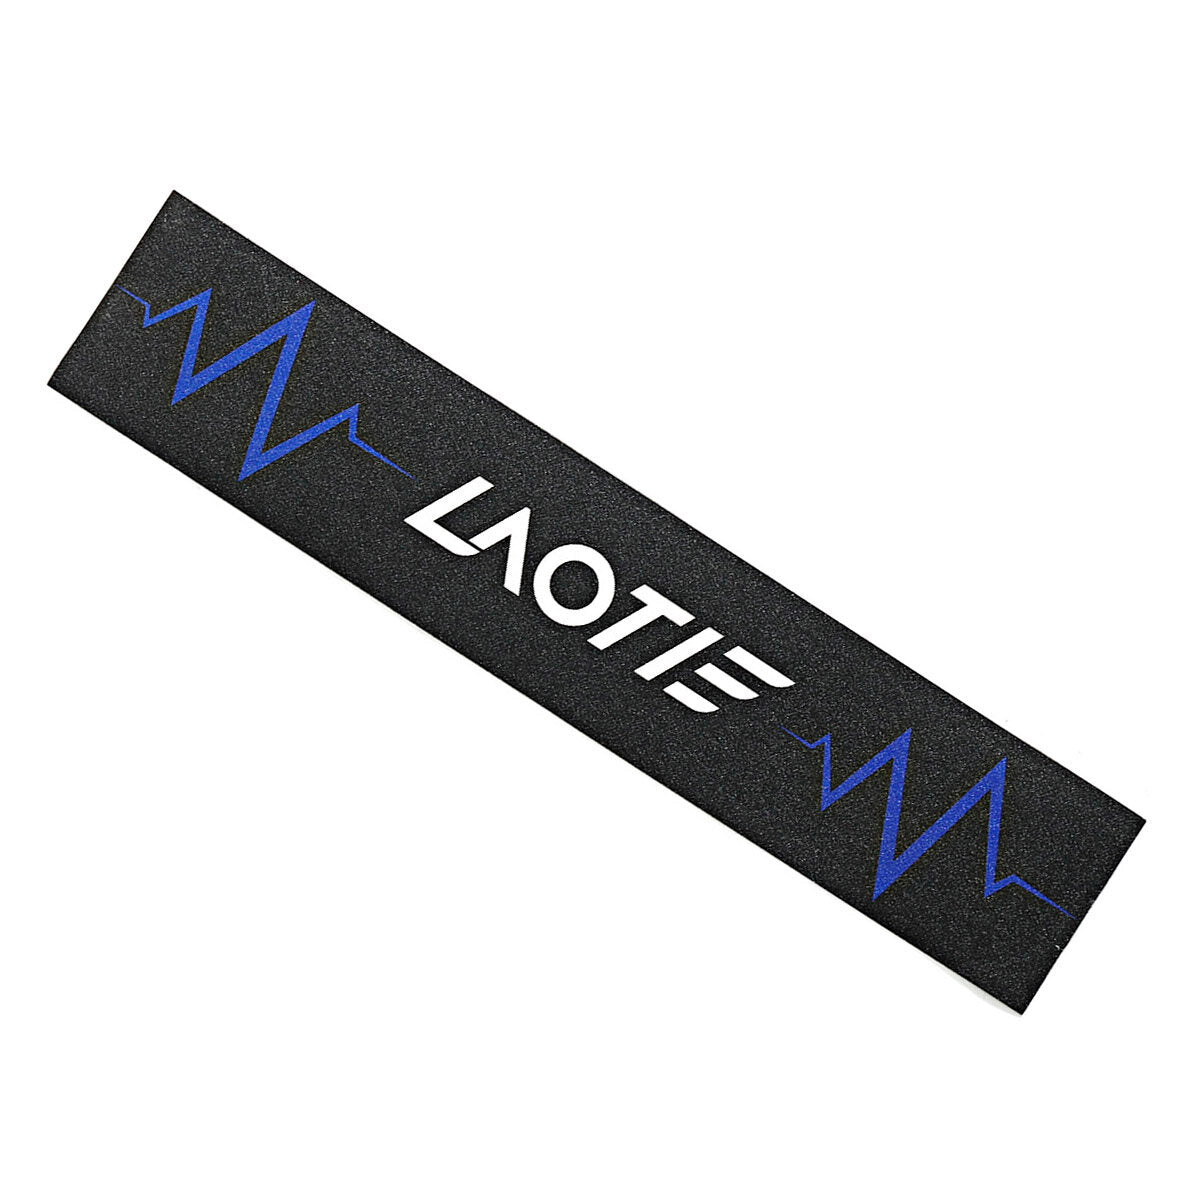 Scooter Pedal Footboard Tape Blue Sandpaper Sticker Anti-slip Waterproof Protective Skate Stickers for All Models of Laotie